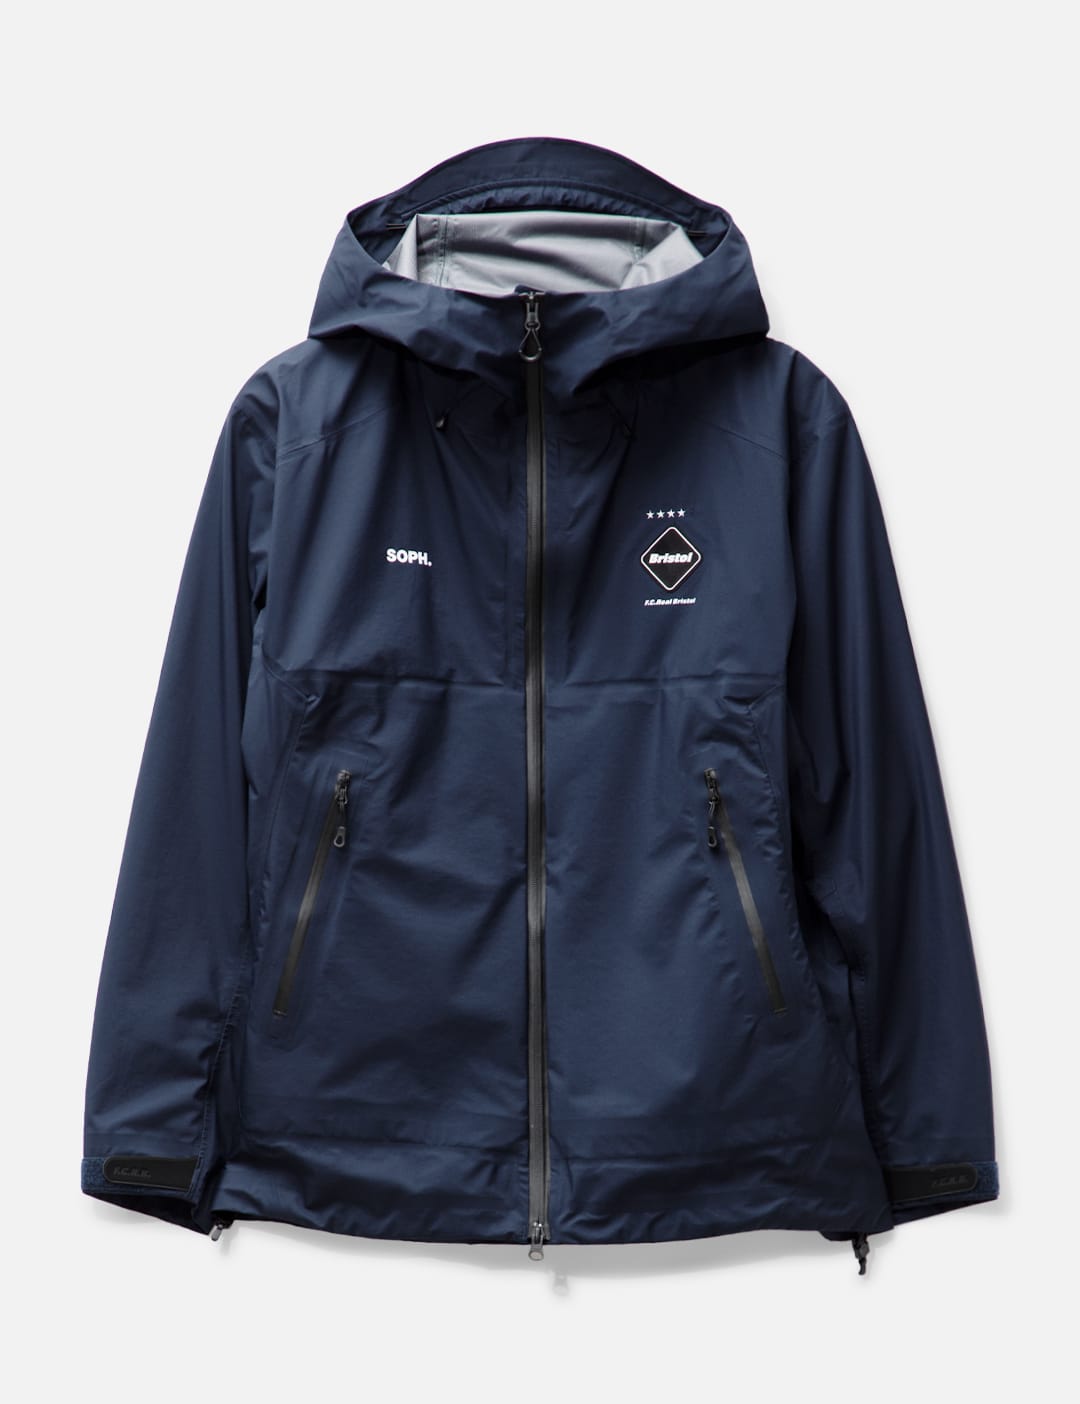 F.C. Real Bristol - 3LAYER WARM UP JACKET | HBX - Globally Curated